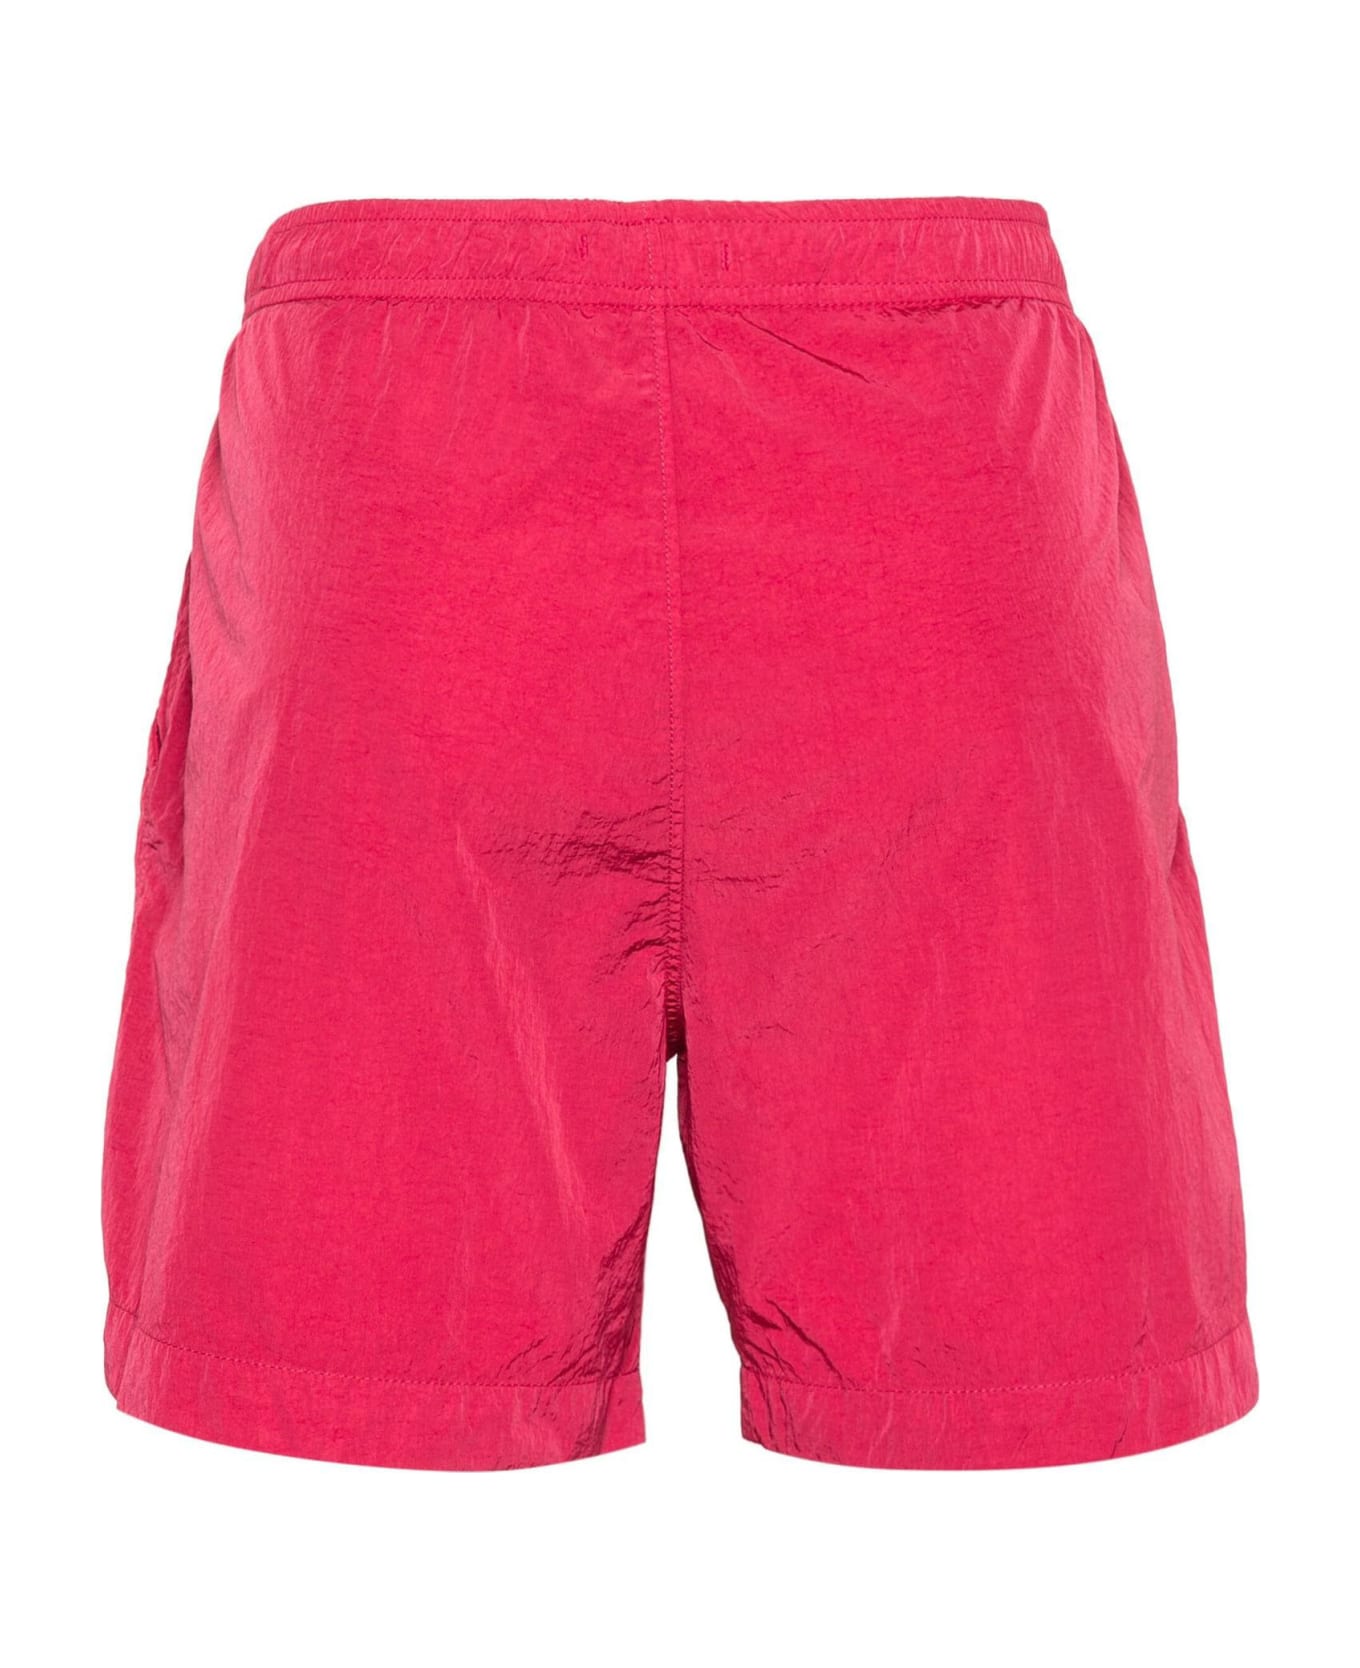 C.P. Company C.p.company Sea Clothing Red - Red